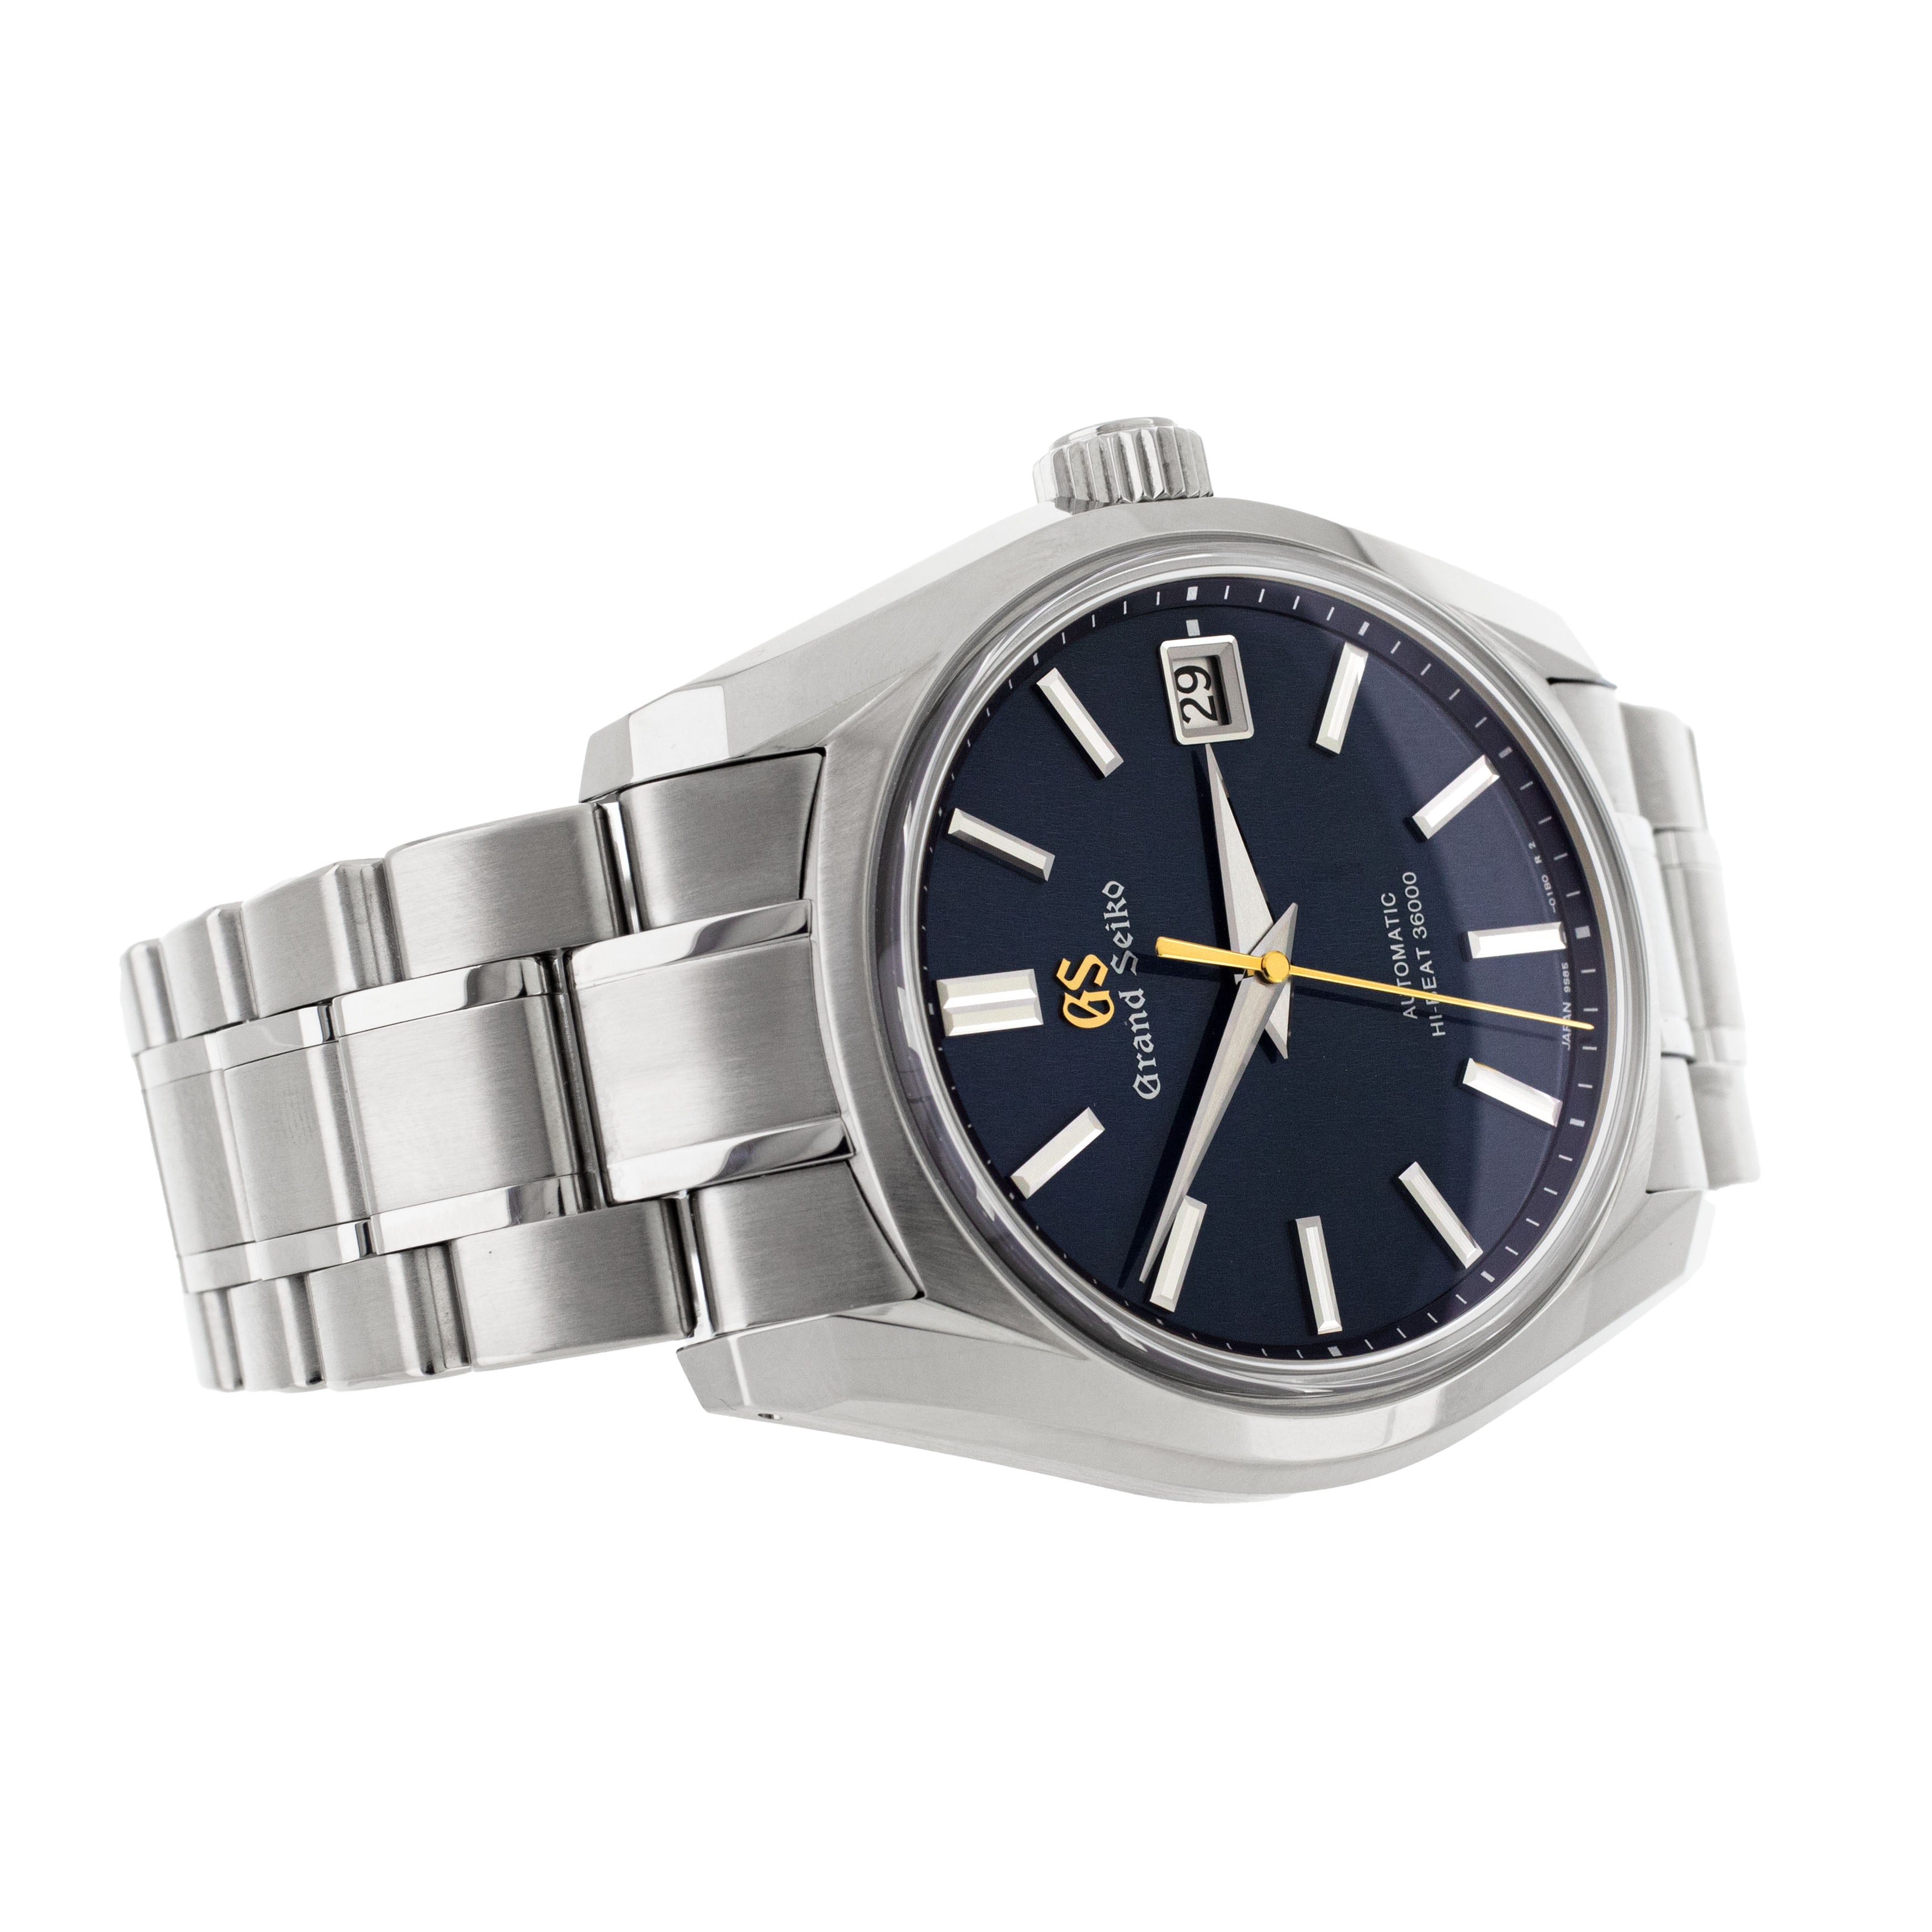 Grand Seiko Heritage The Autumnal Equinox Steel Blue Dial 40mm SBGH273 Full Set